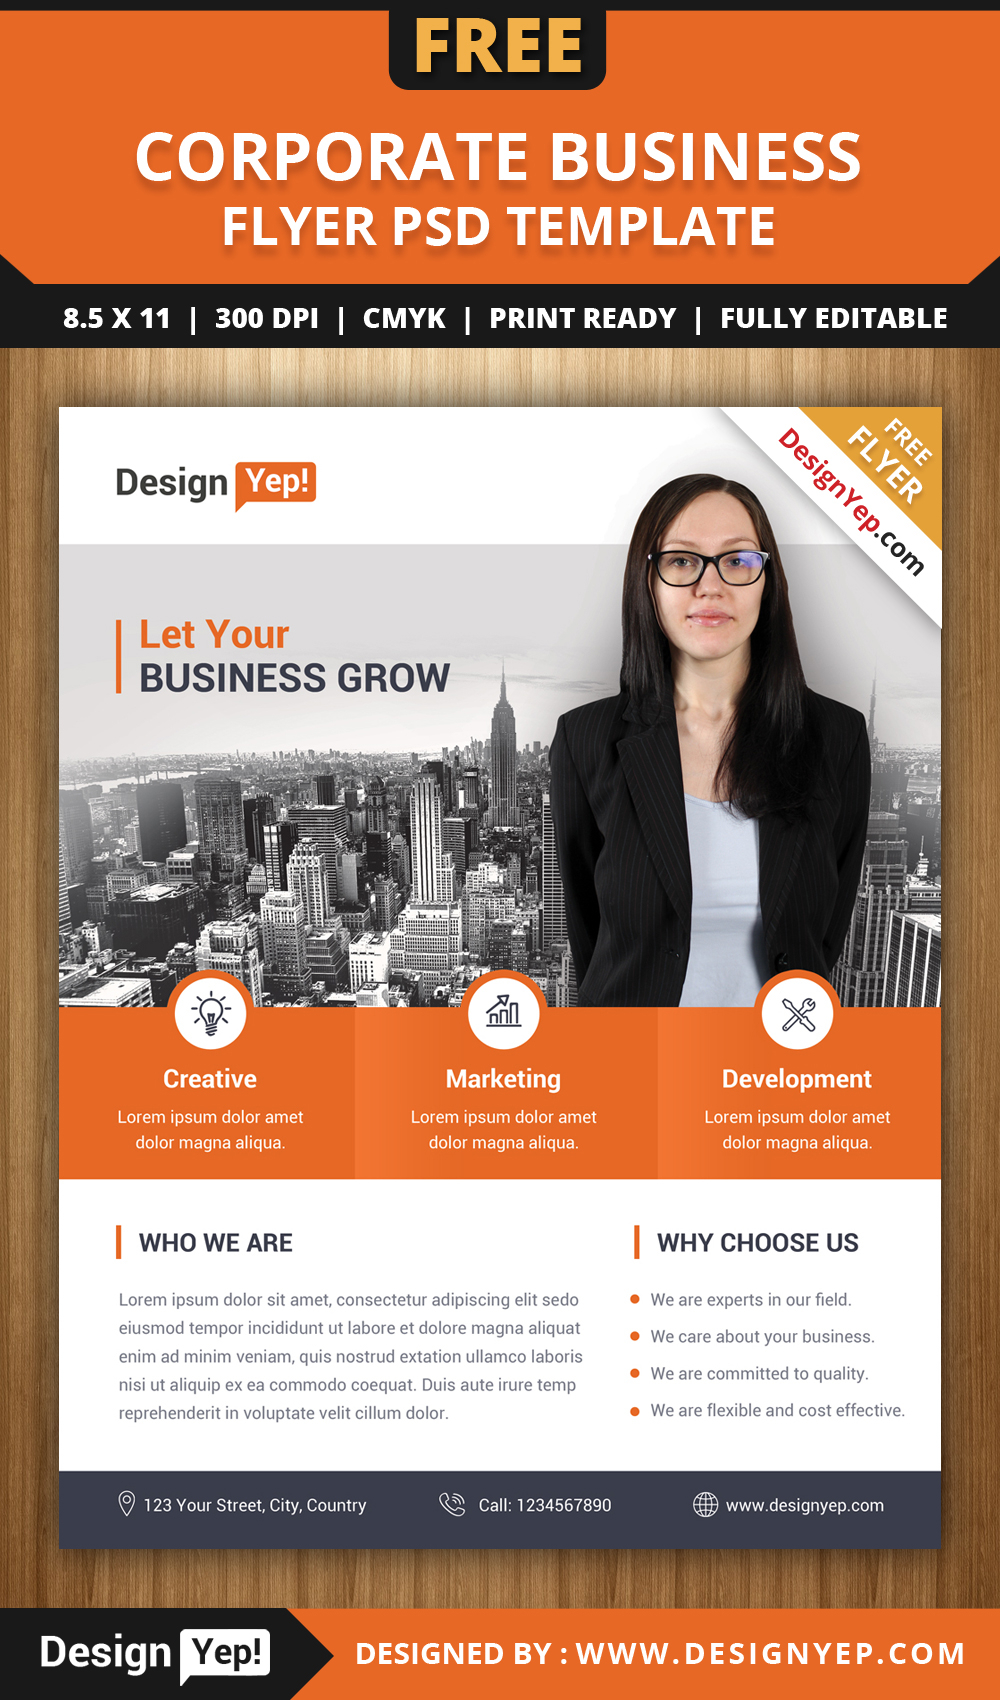 013 Free Business Flyer Templates Template Ideas Flyers Pertaining To Free Business Flyer Templates For Microsoft Word